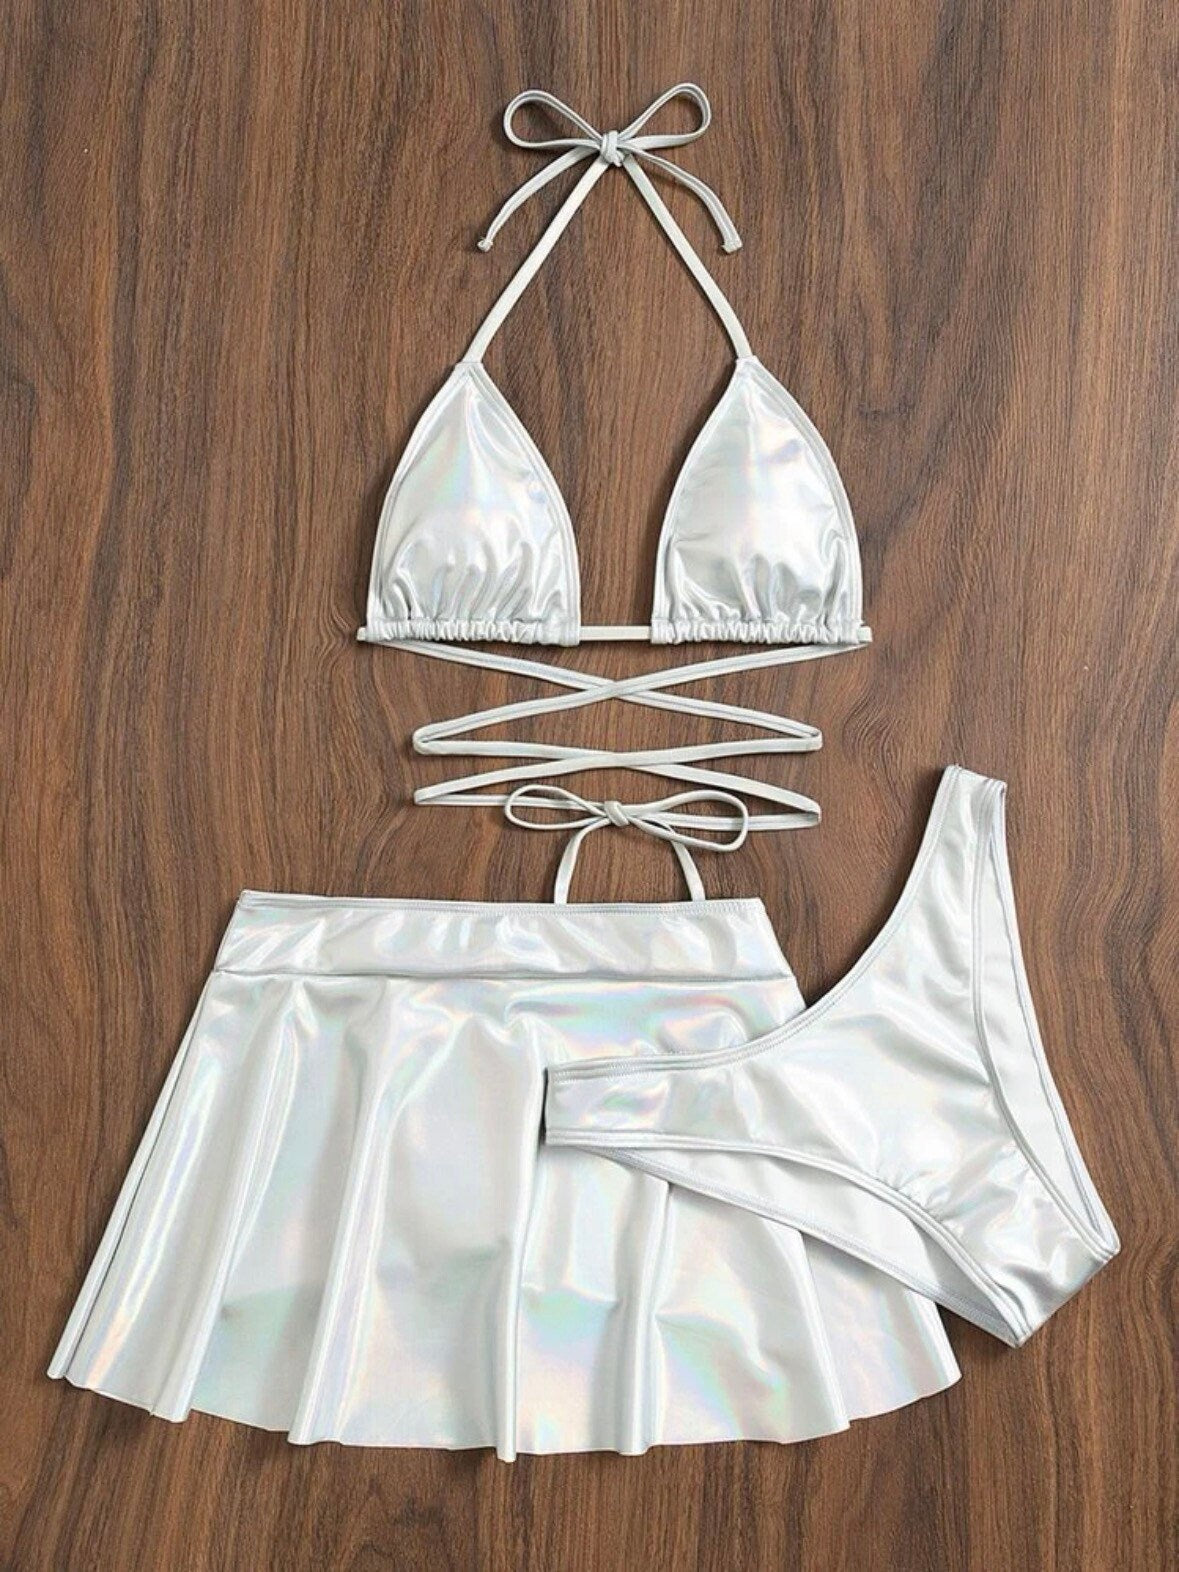 The Metallic silver swim bikini with beach skirt and solid metallic silver print triangle halter top tie and bottoms swimsuit 3 piece set